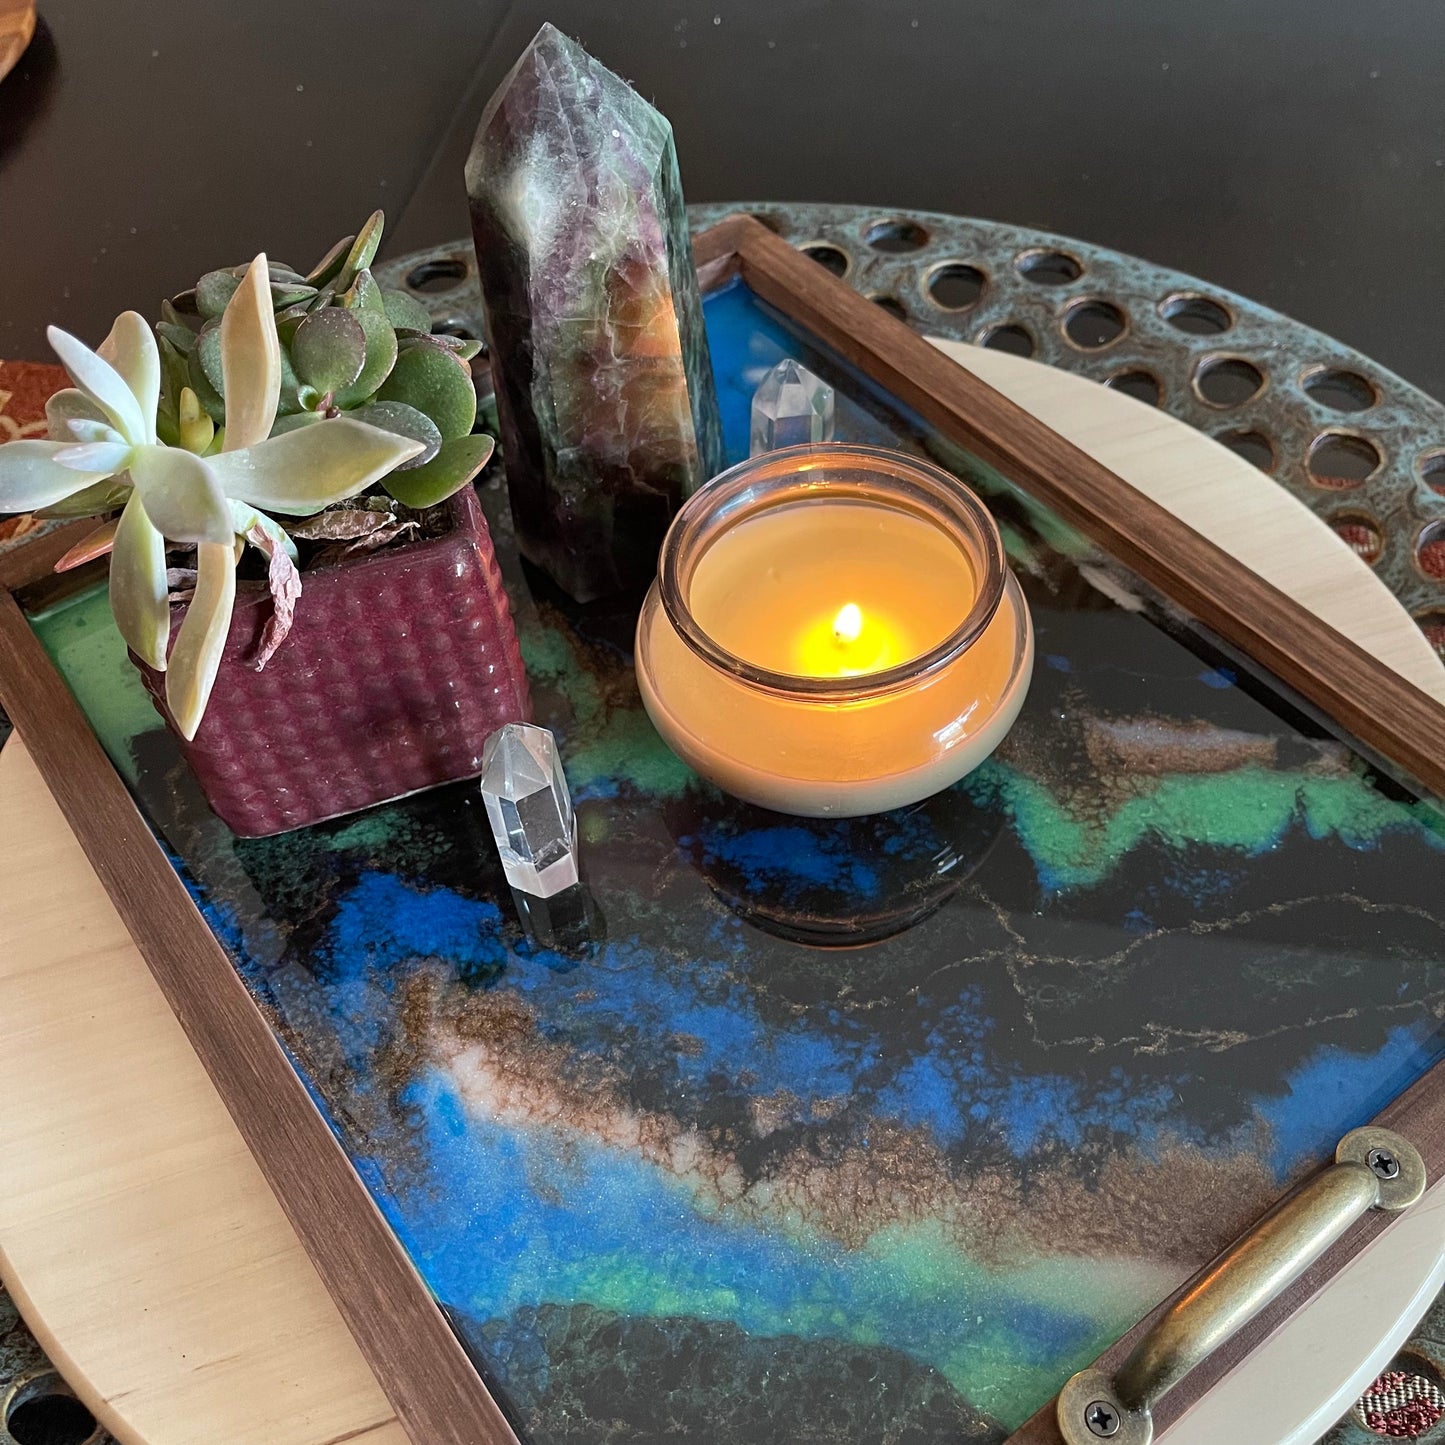 Resin Tray Class - Tuesday 6/18 at 6pm